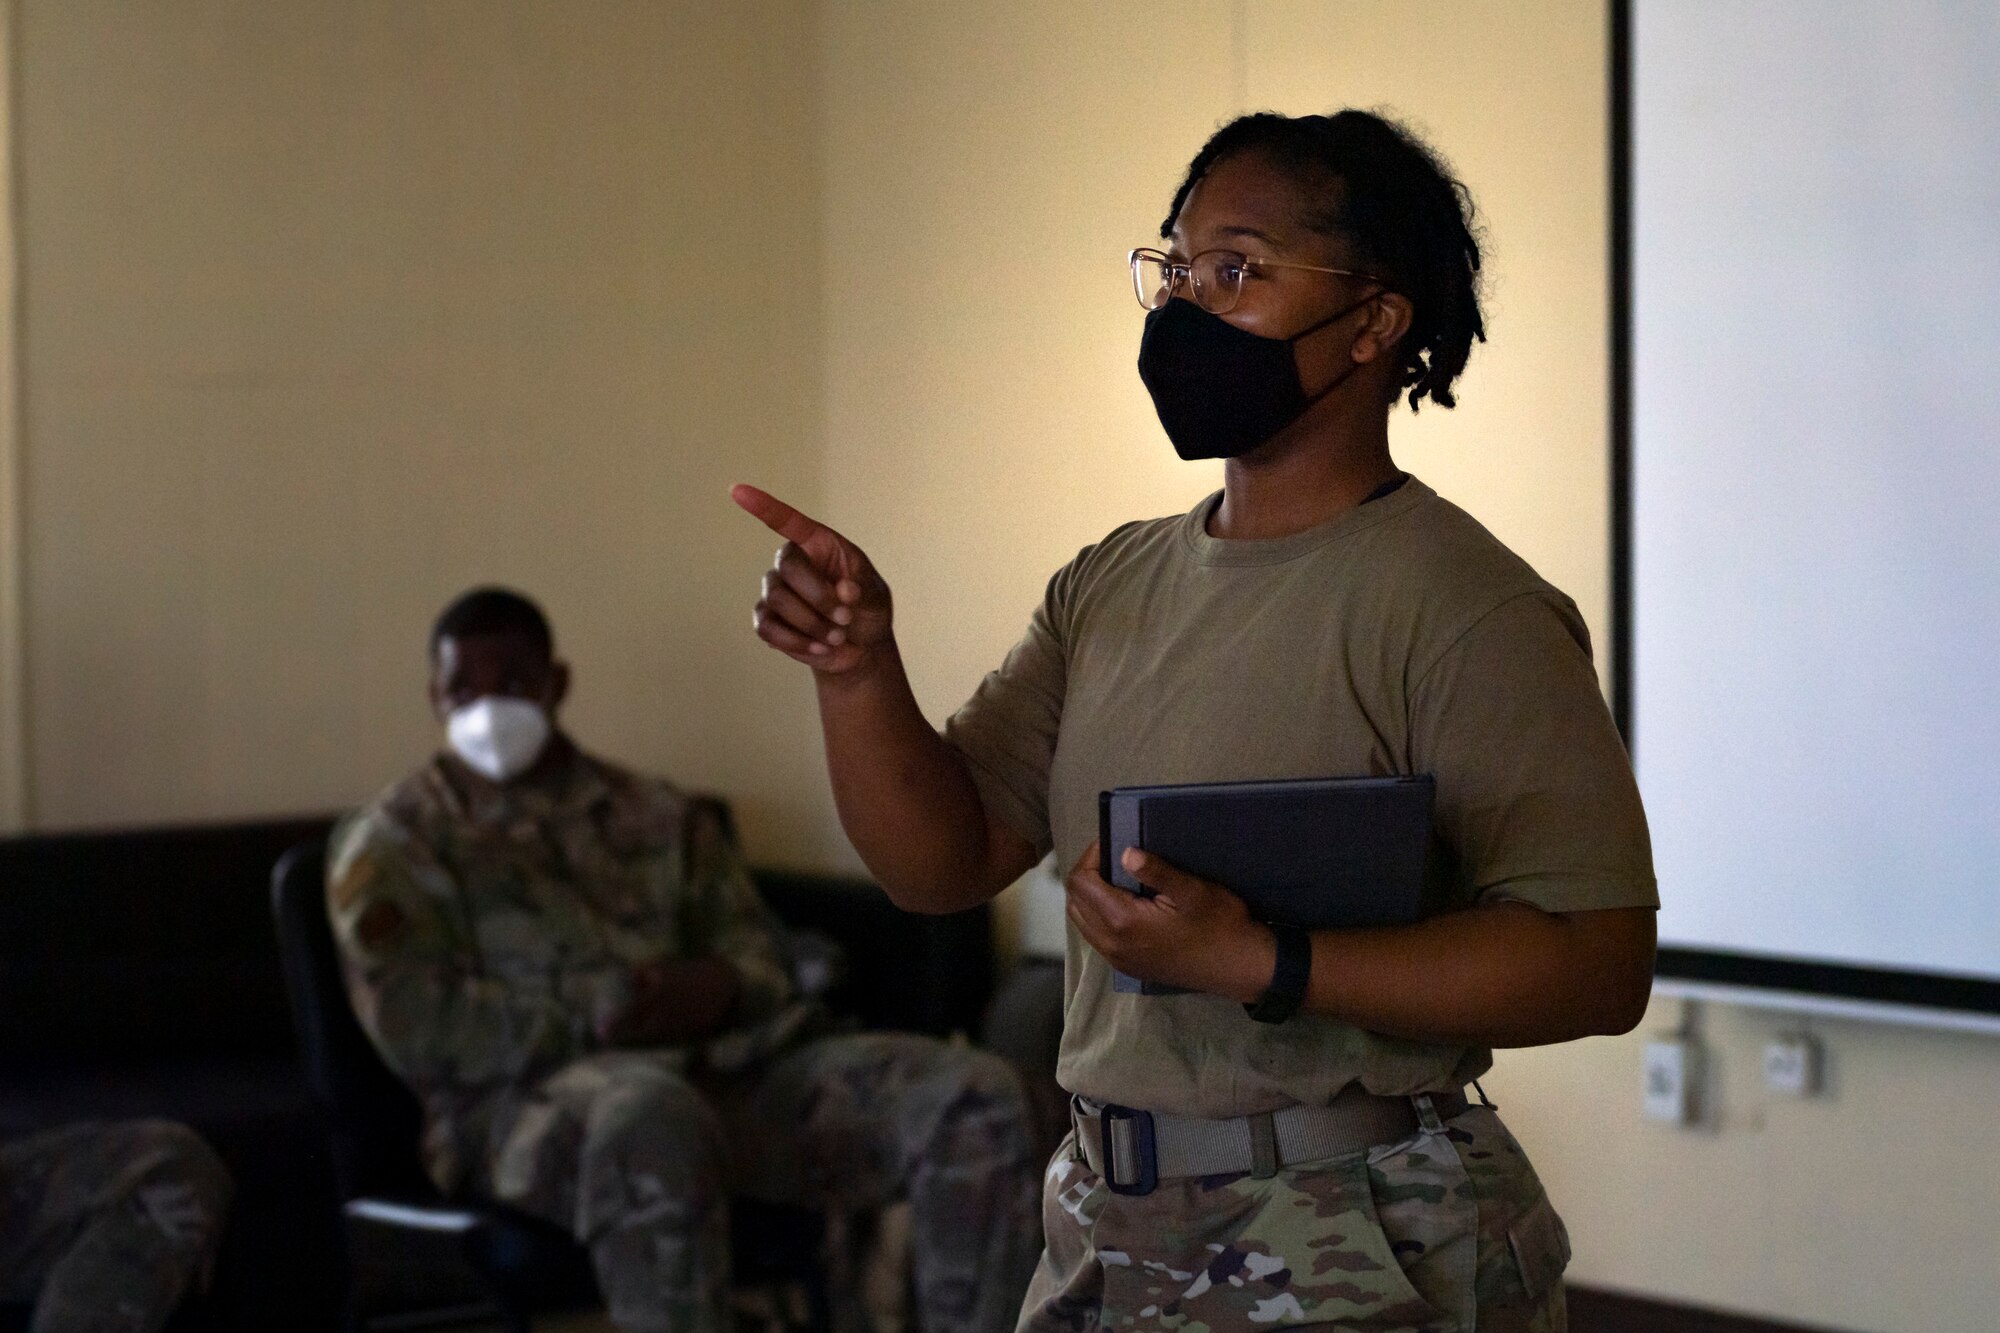 A photo of an Airman speaking to a group